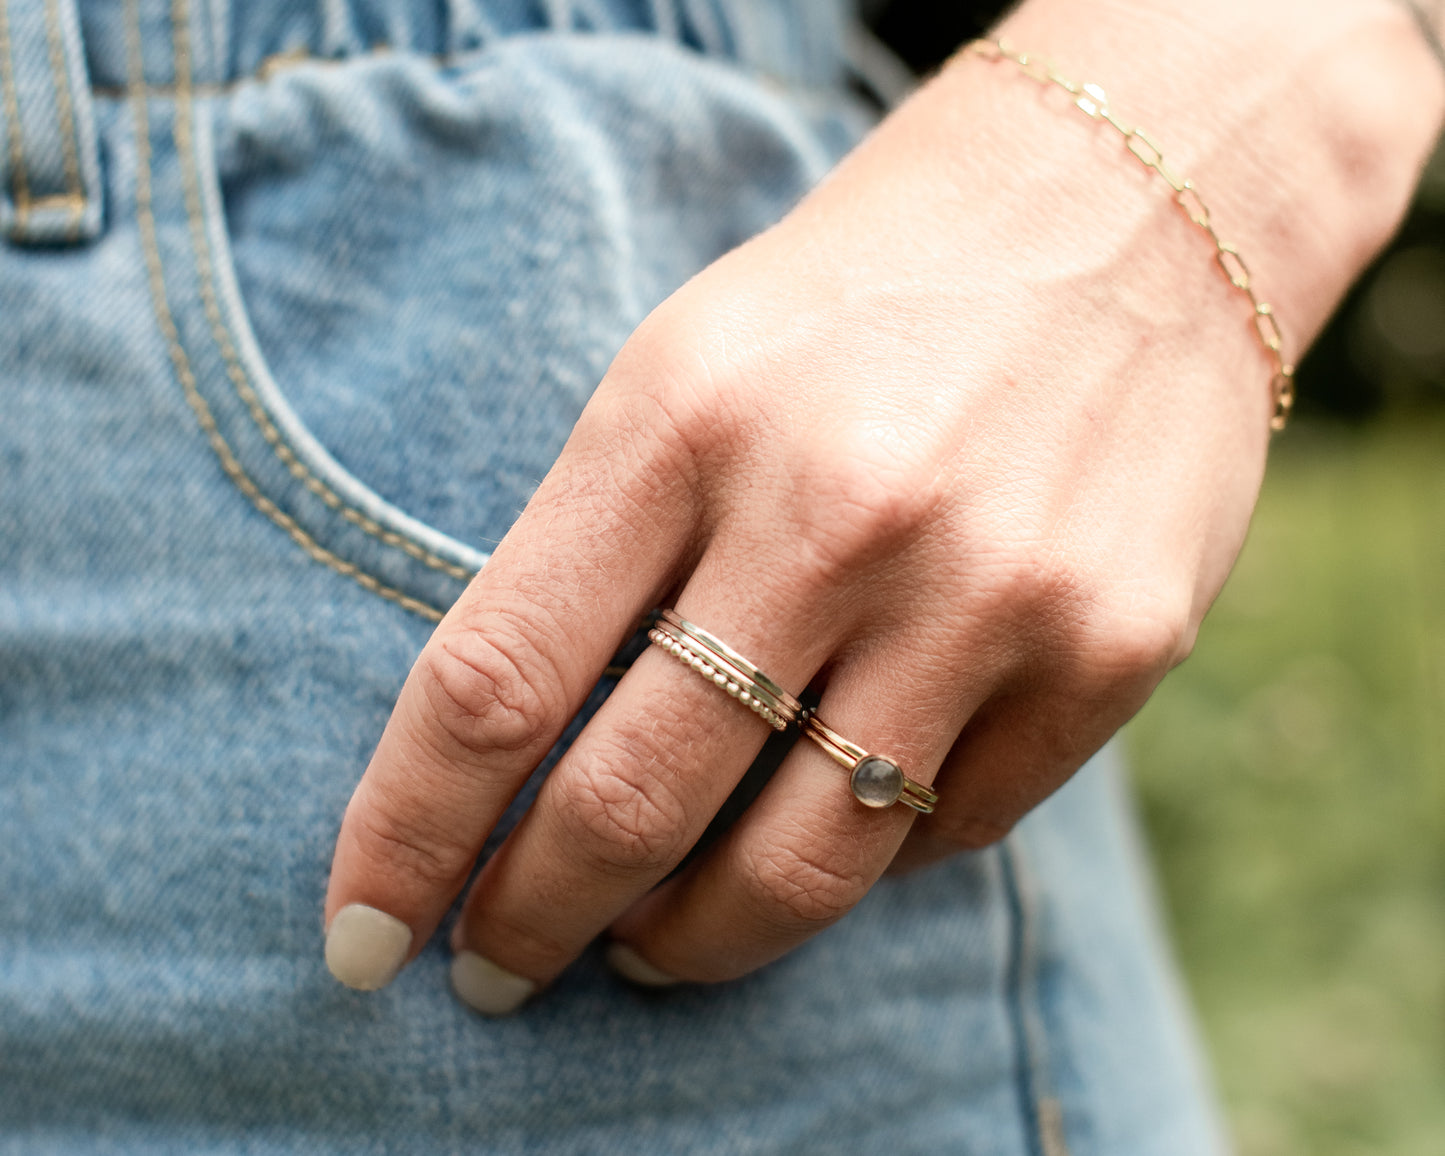 wave ring in sterling silver or 14k gold fill | hammered stacking ring